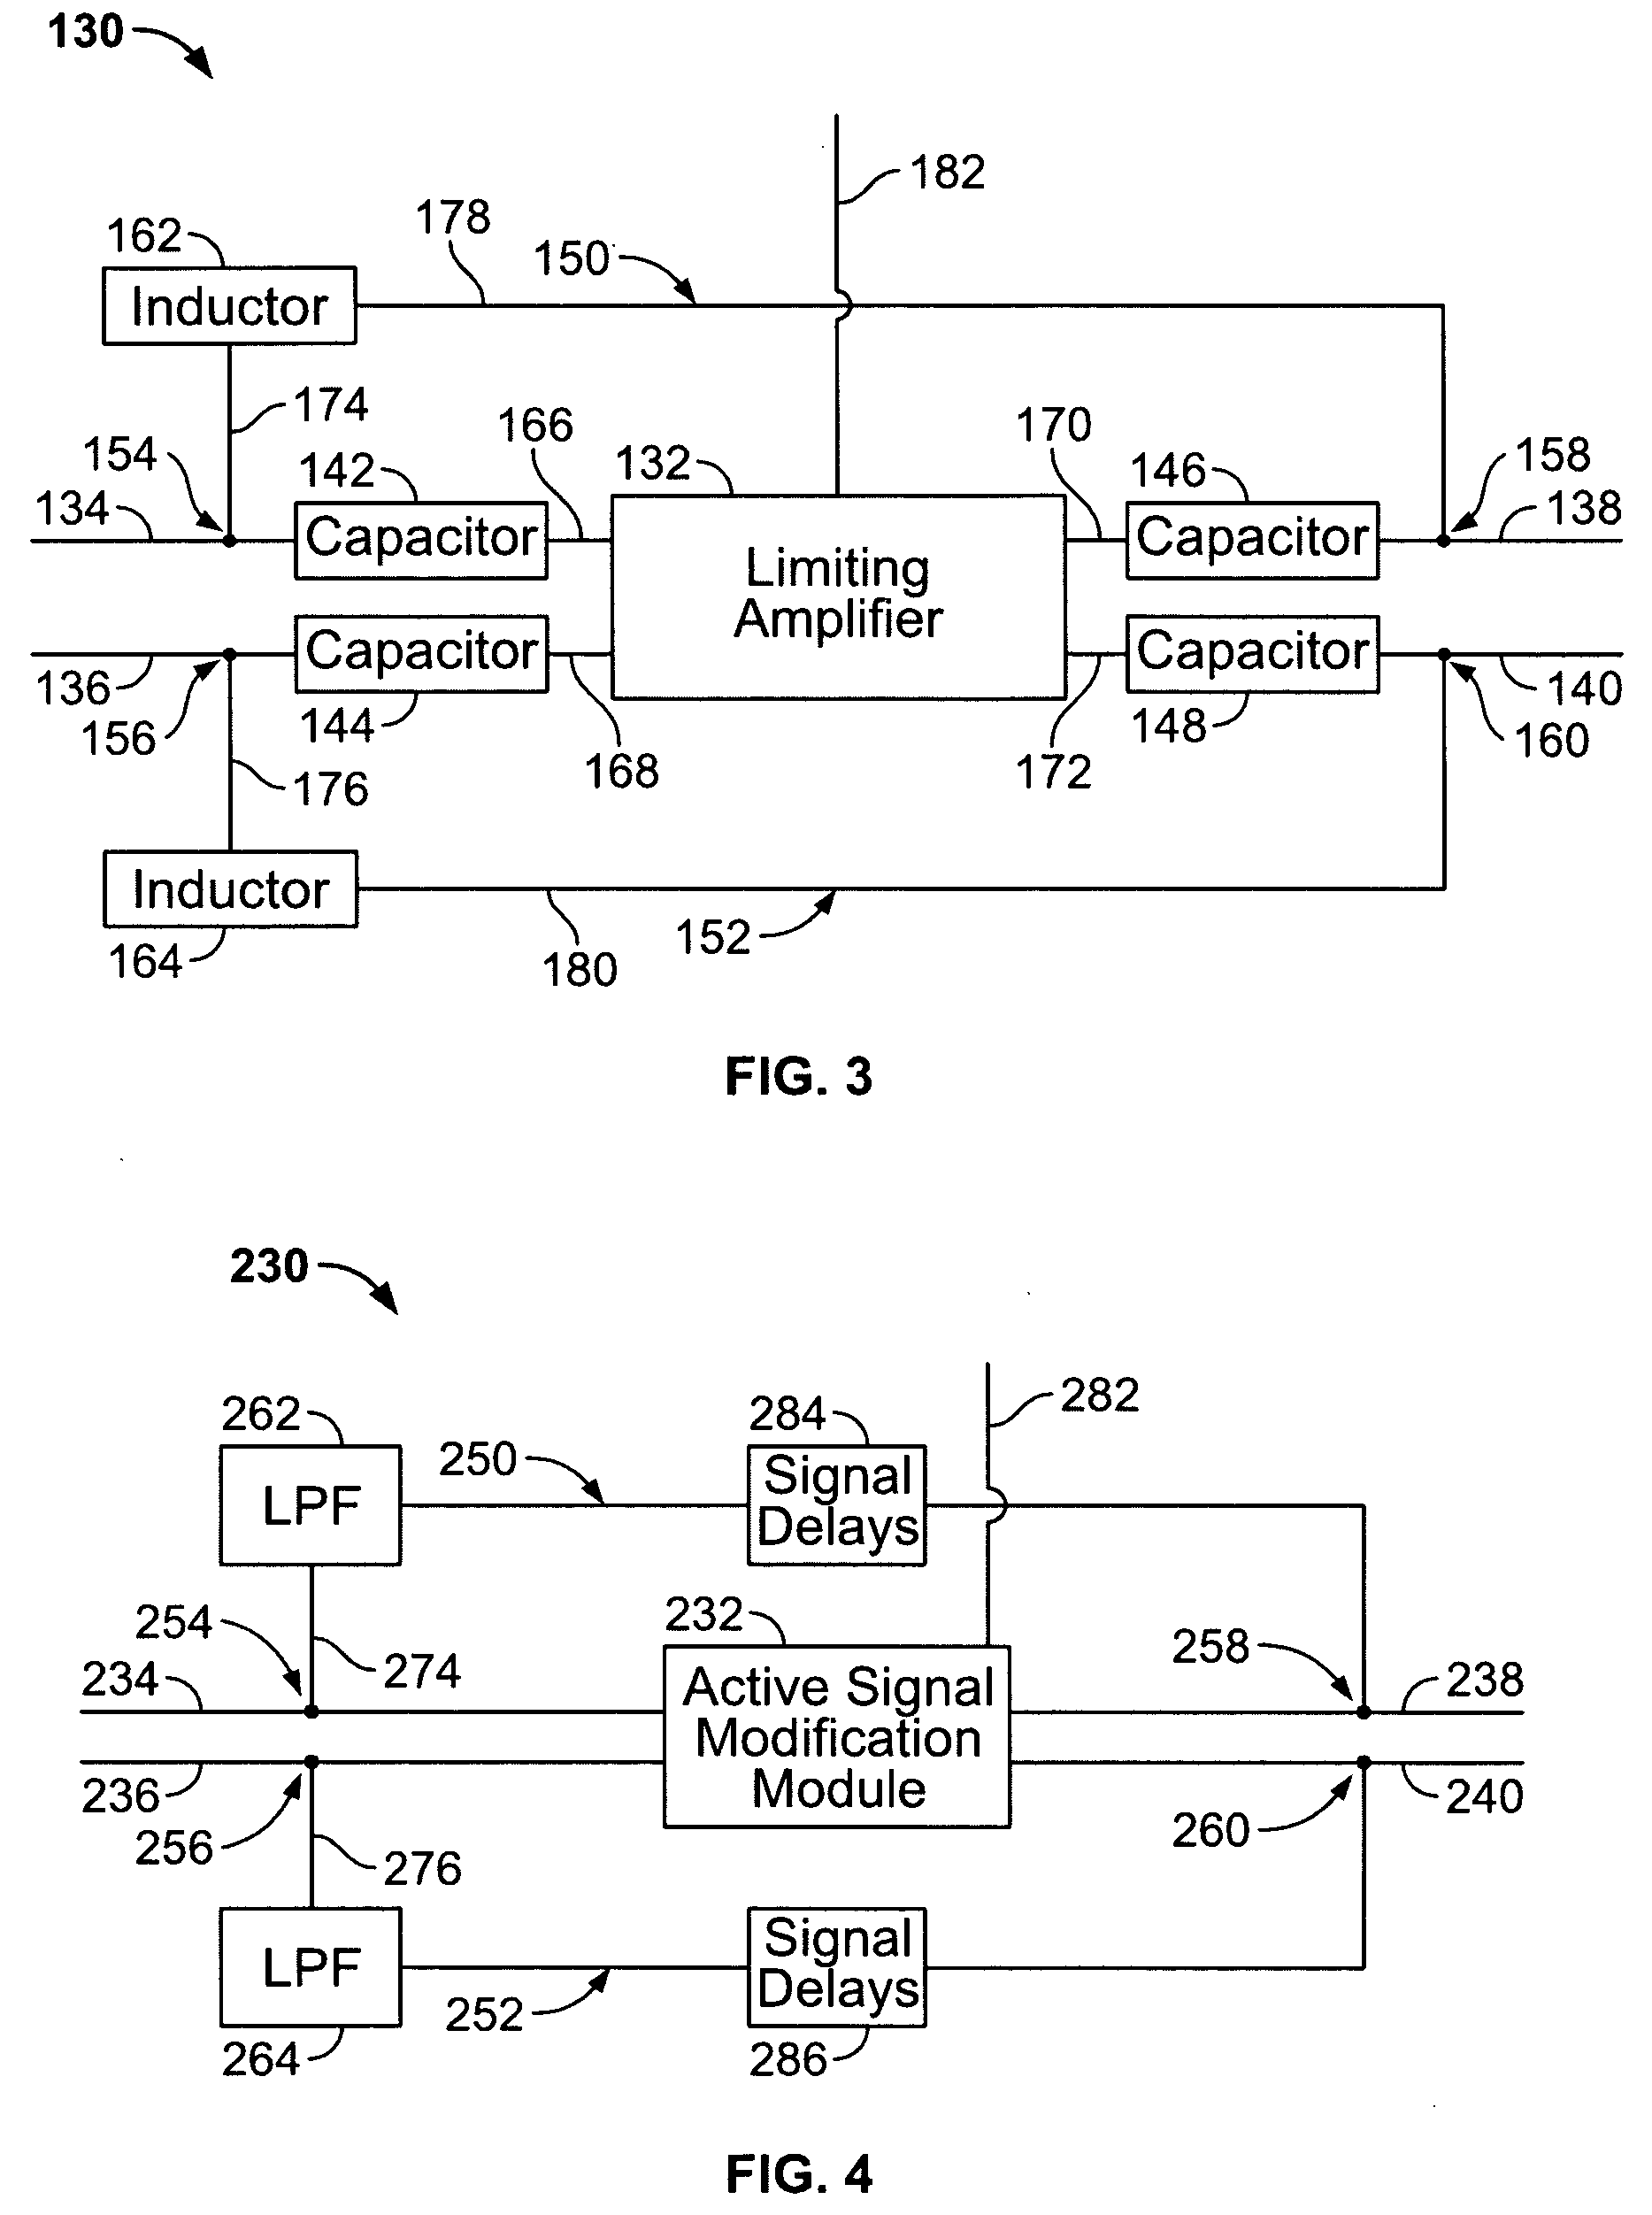 Multi-mode signal modification circuit with common mode bypass